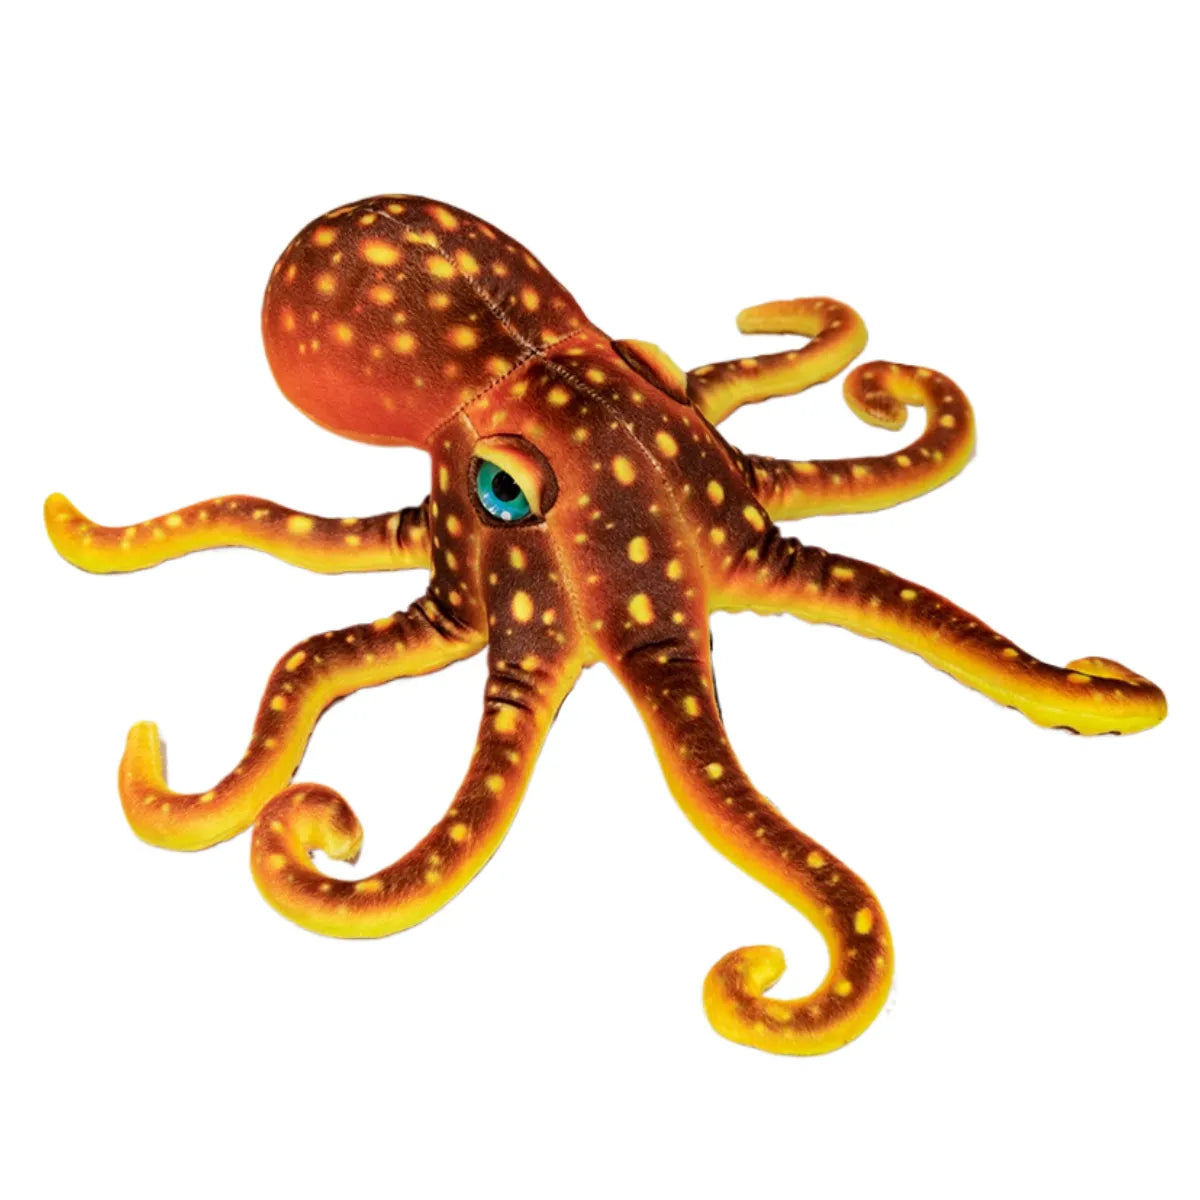 Realistic Octopus Stuffed Animal Marine Animals Toy Gifts for Kids (21.6 inch)